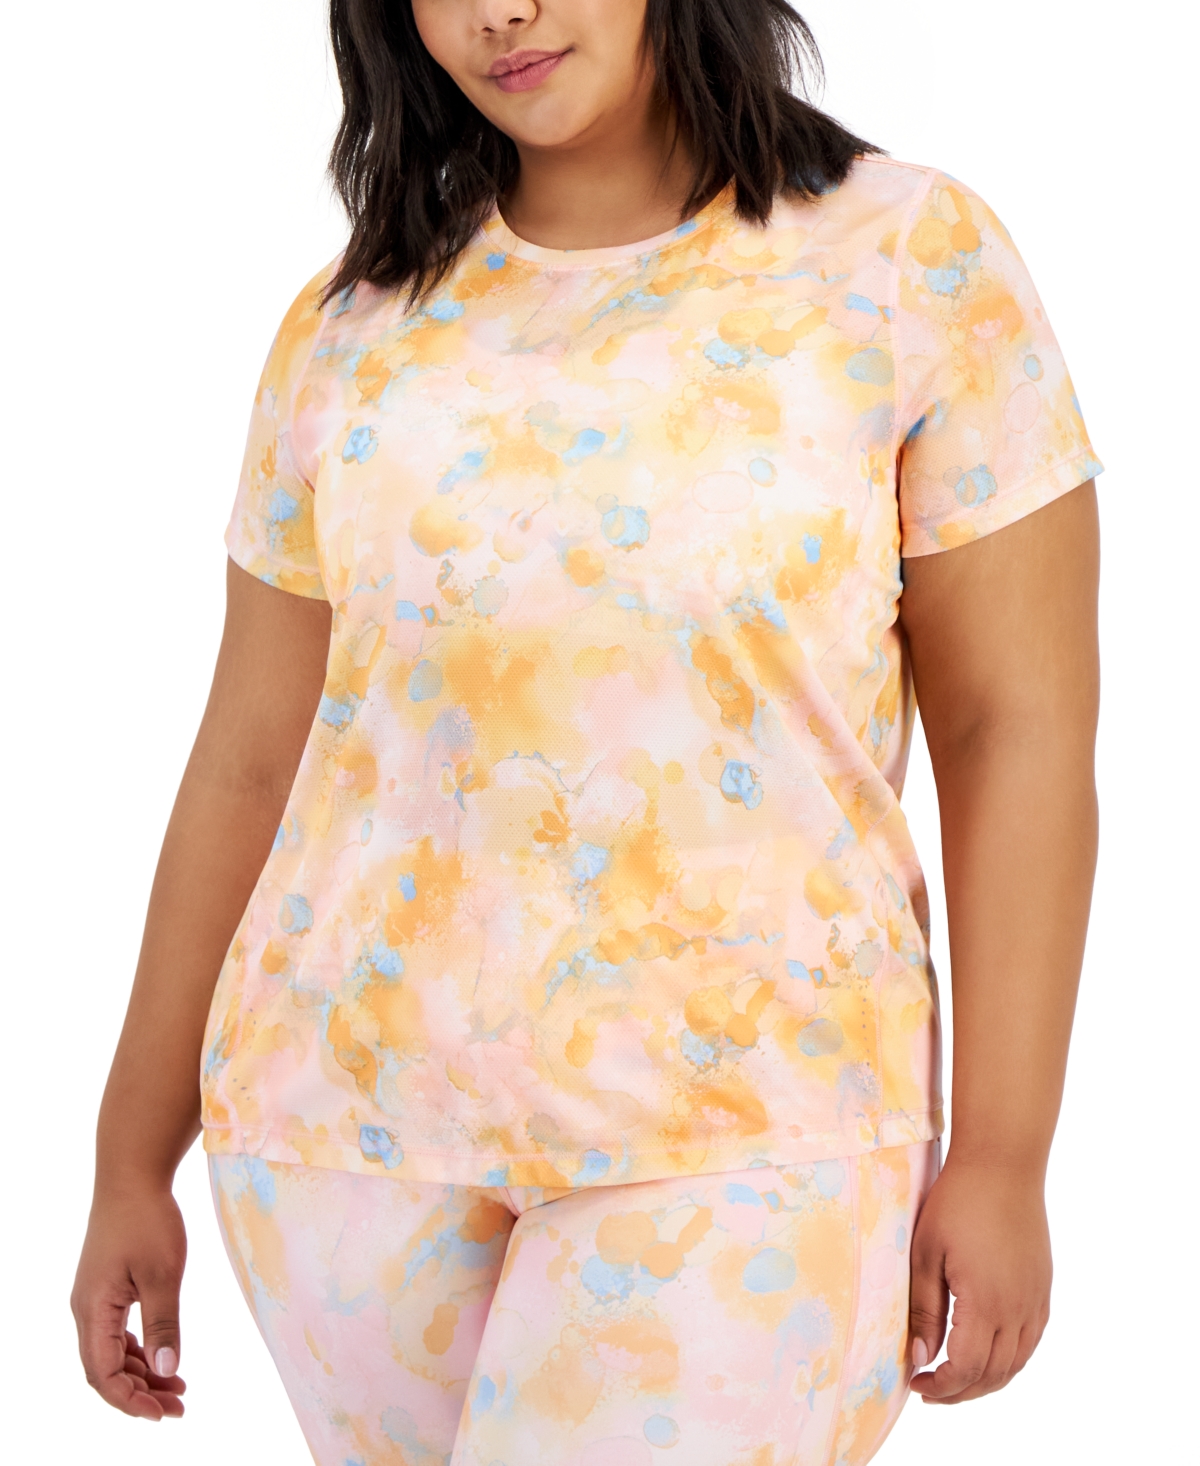 Plus Size Dreamy Bubble-Print Birdseye Mesh Top, Created for Macy's - Pink Icing